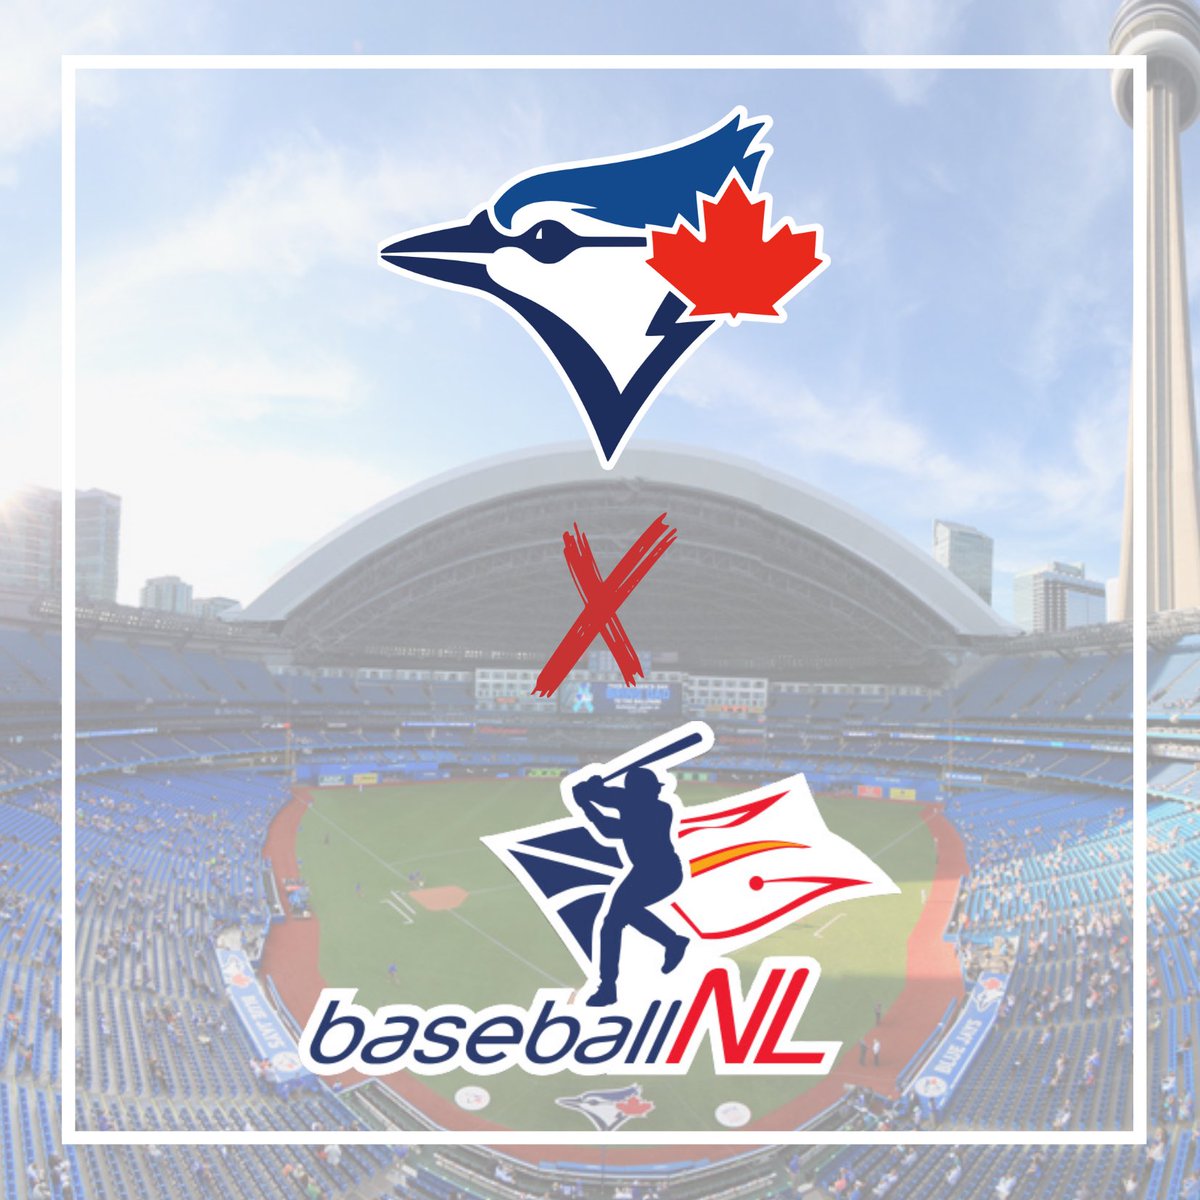 Happy #OpeningDay everyone! We’re super excited for another @BlueJays season to kick off! #TOTHECORE For today’s season opener - make sure you share with us how you’re enjoying Opening Day! You could win a Baseball NL prize pack!